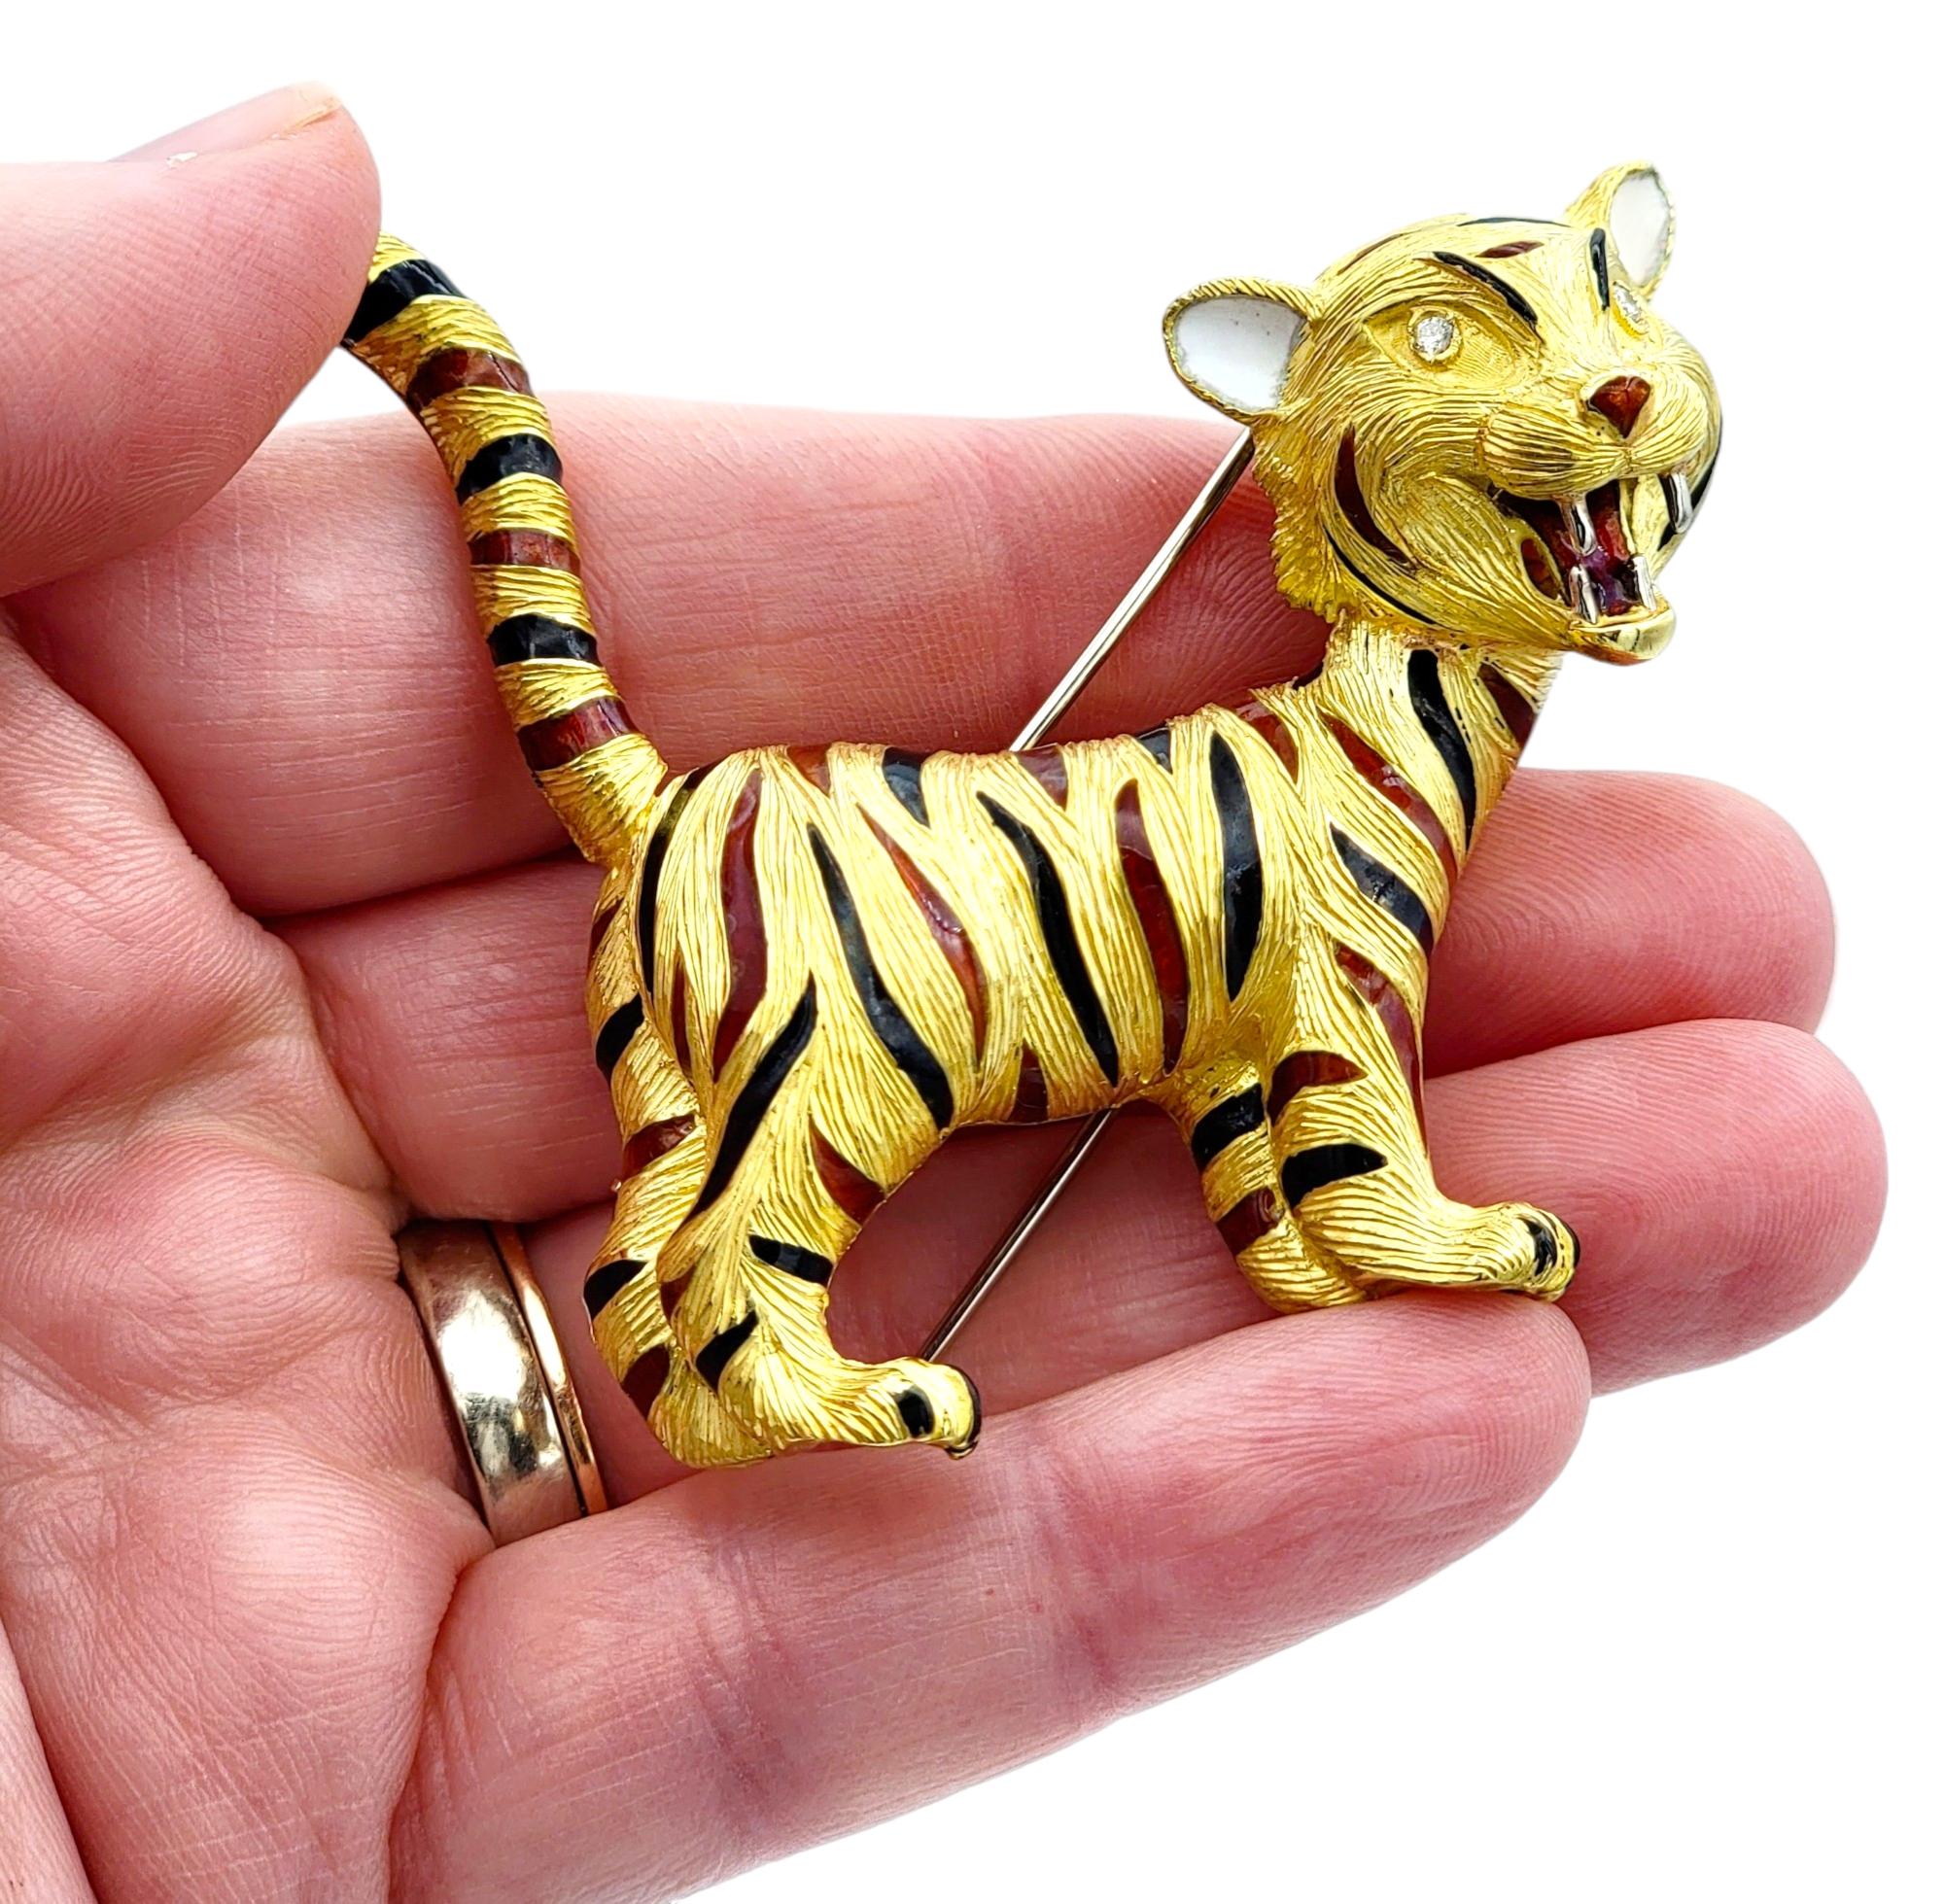 Vintage Enamel Striped Tiger Brooch with Diamond Eyes in 18 Karat Yellow Gold For Sale 1